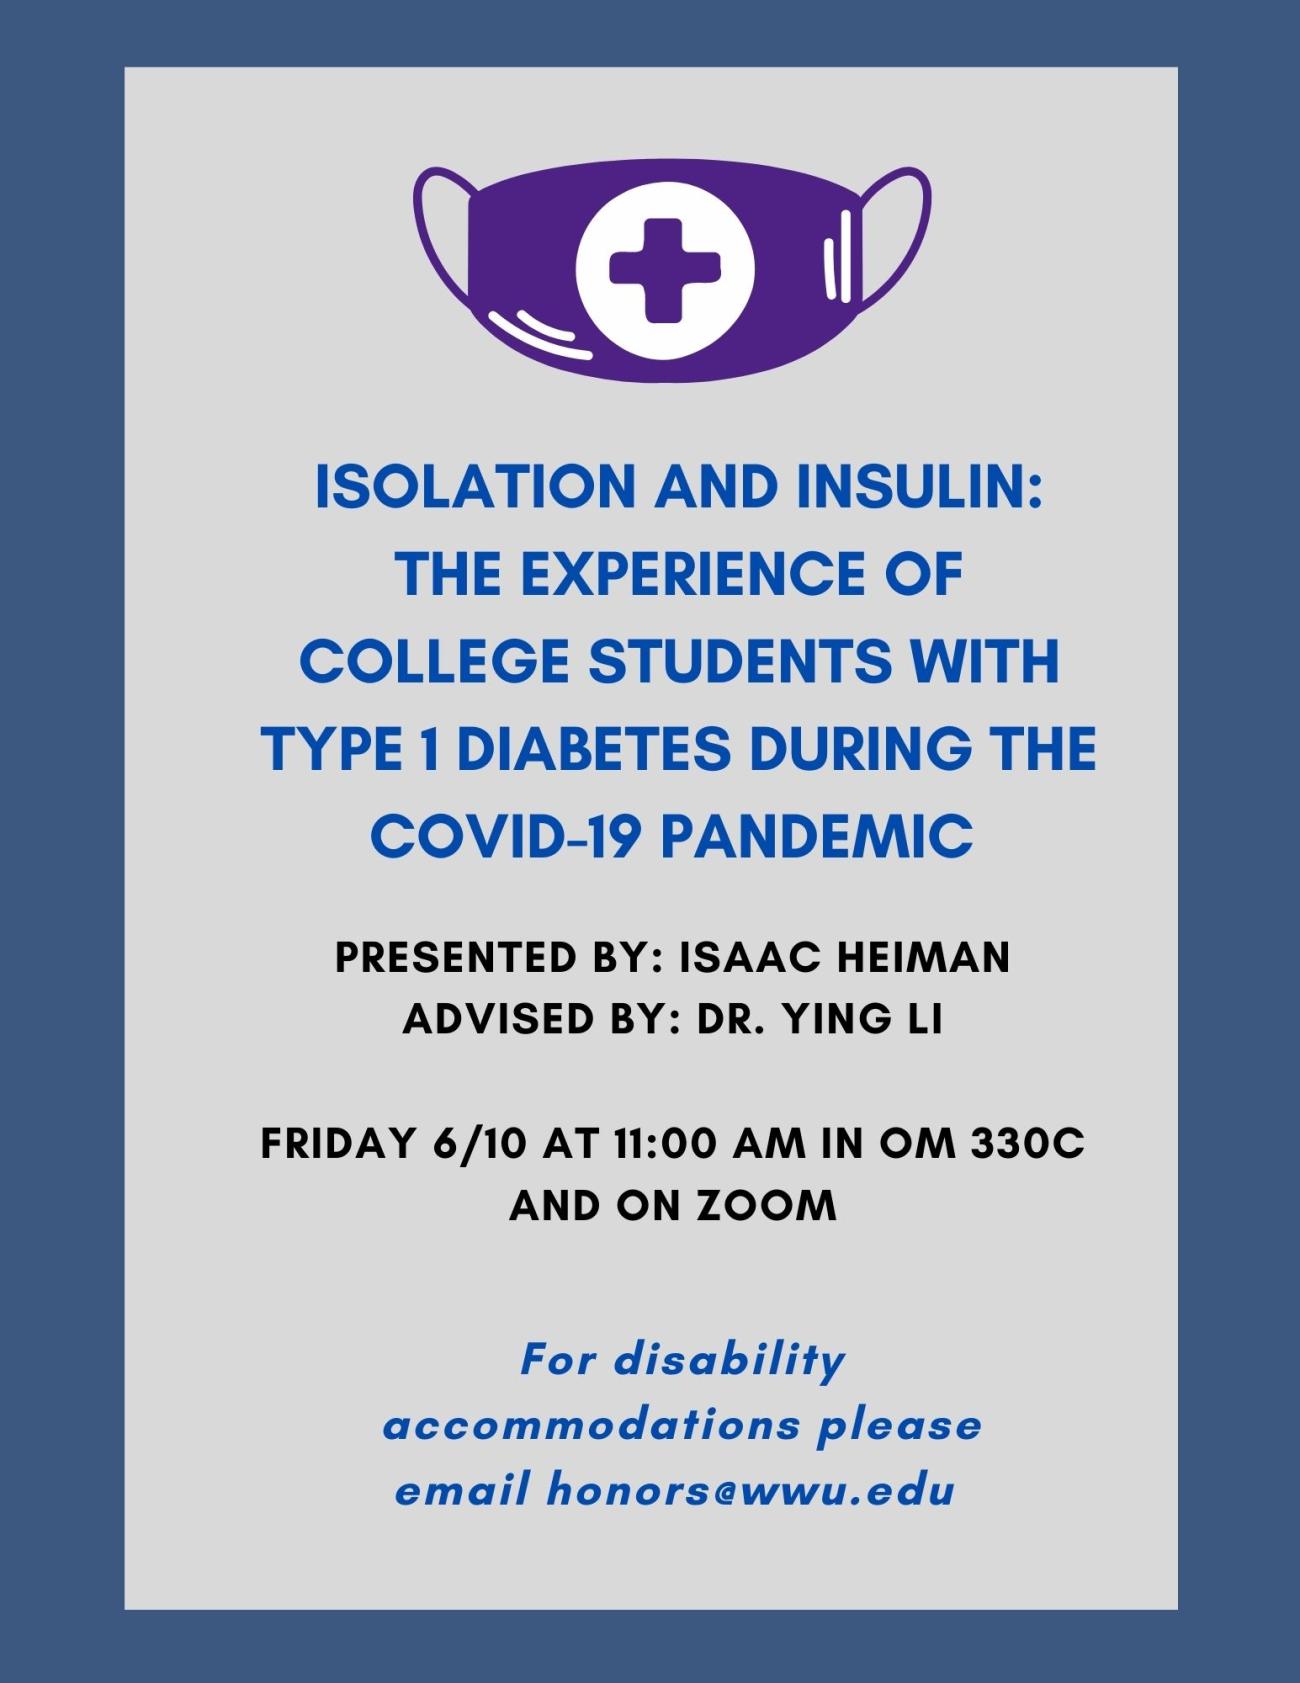 Gray background with a dark blue border. Near the top, there is a clip art image of a purple face mask with a white medical cross on the front of it. Text reads: "Isolation and Insulin: The experience of college students with type 1 diabetes during the COVID-19 pandemic. Presented by: Isaac Heiman, Advised by: Dr. Ying Li, Friday 6/10 at 11:00 AM in OM 330C and on Zoom, For disability accommodations please email honors@wwu.edu."